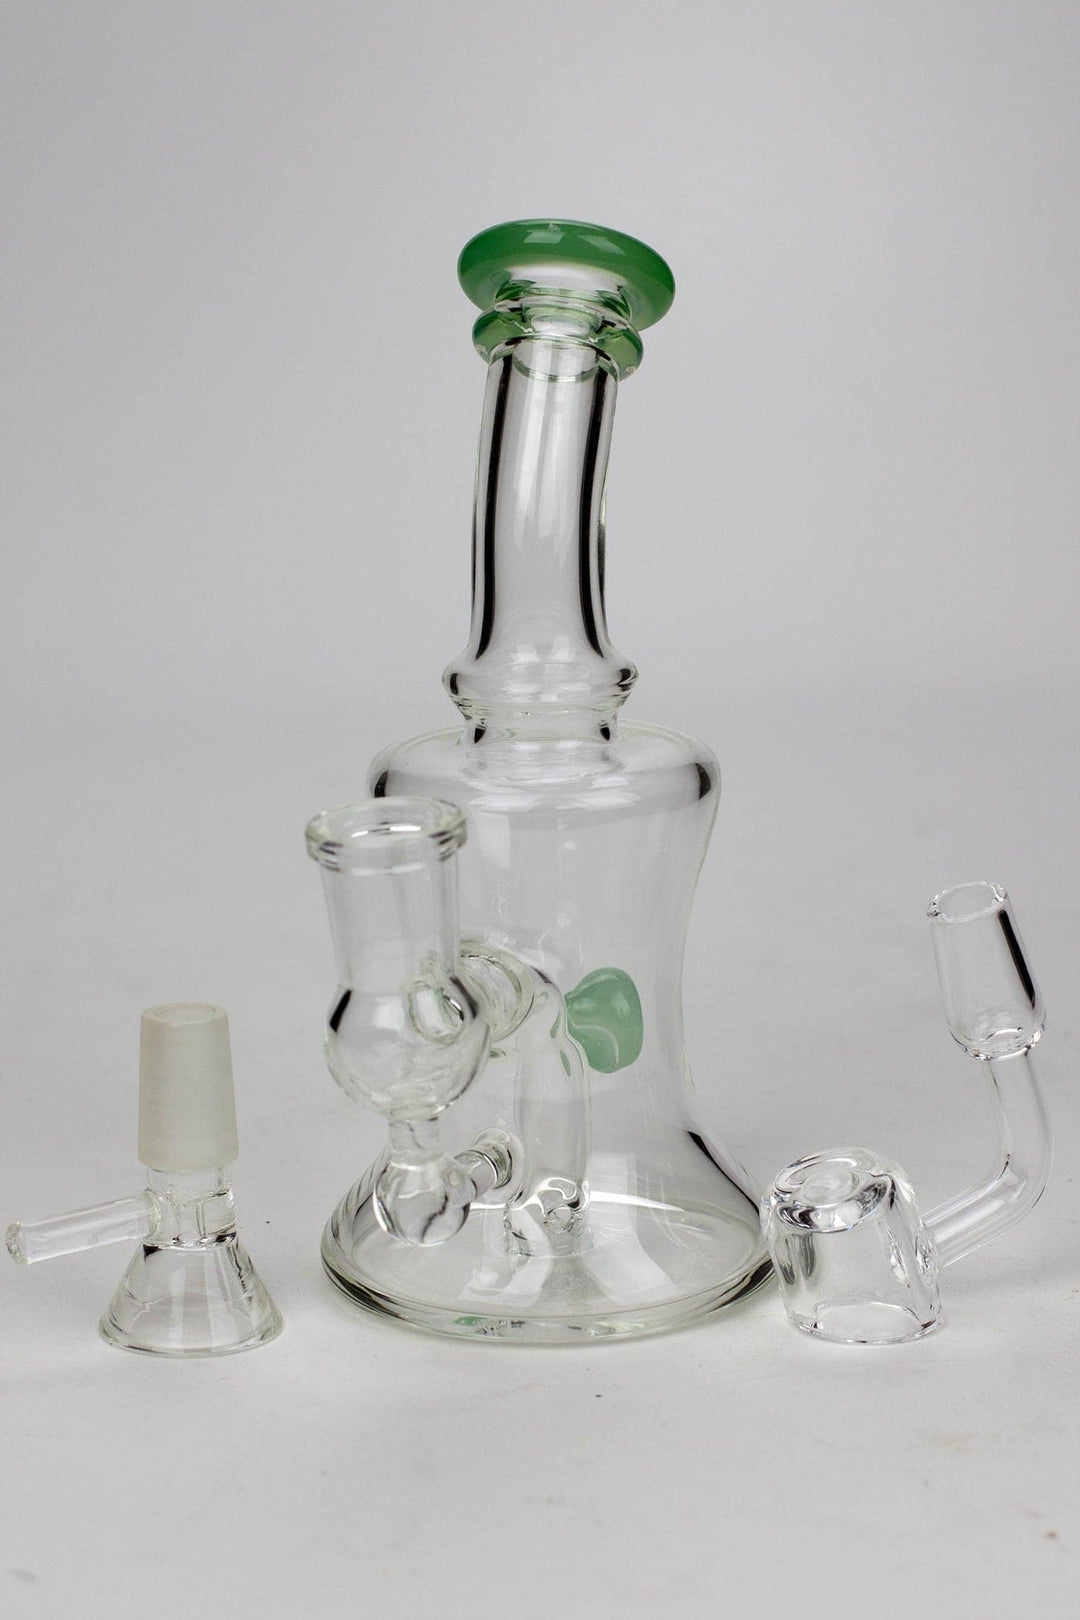 Fixed 3 hole diffuser skirt bubbler_6